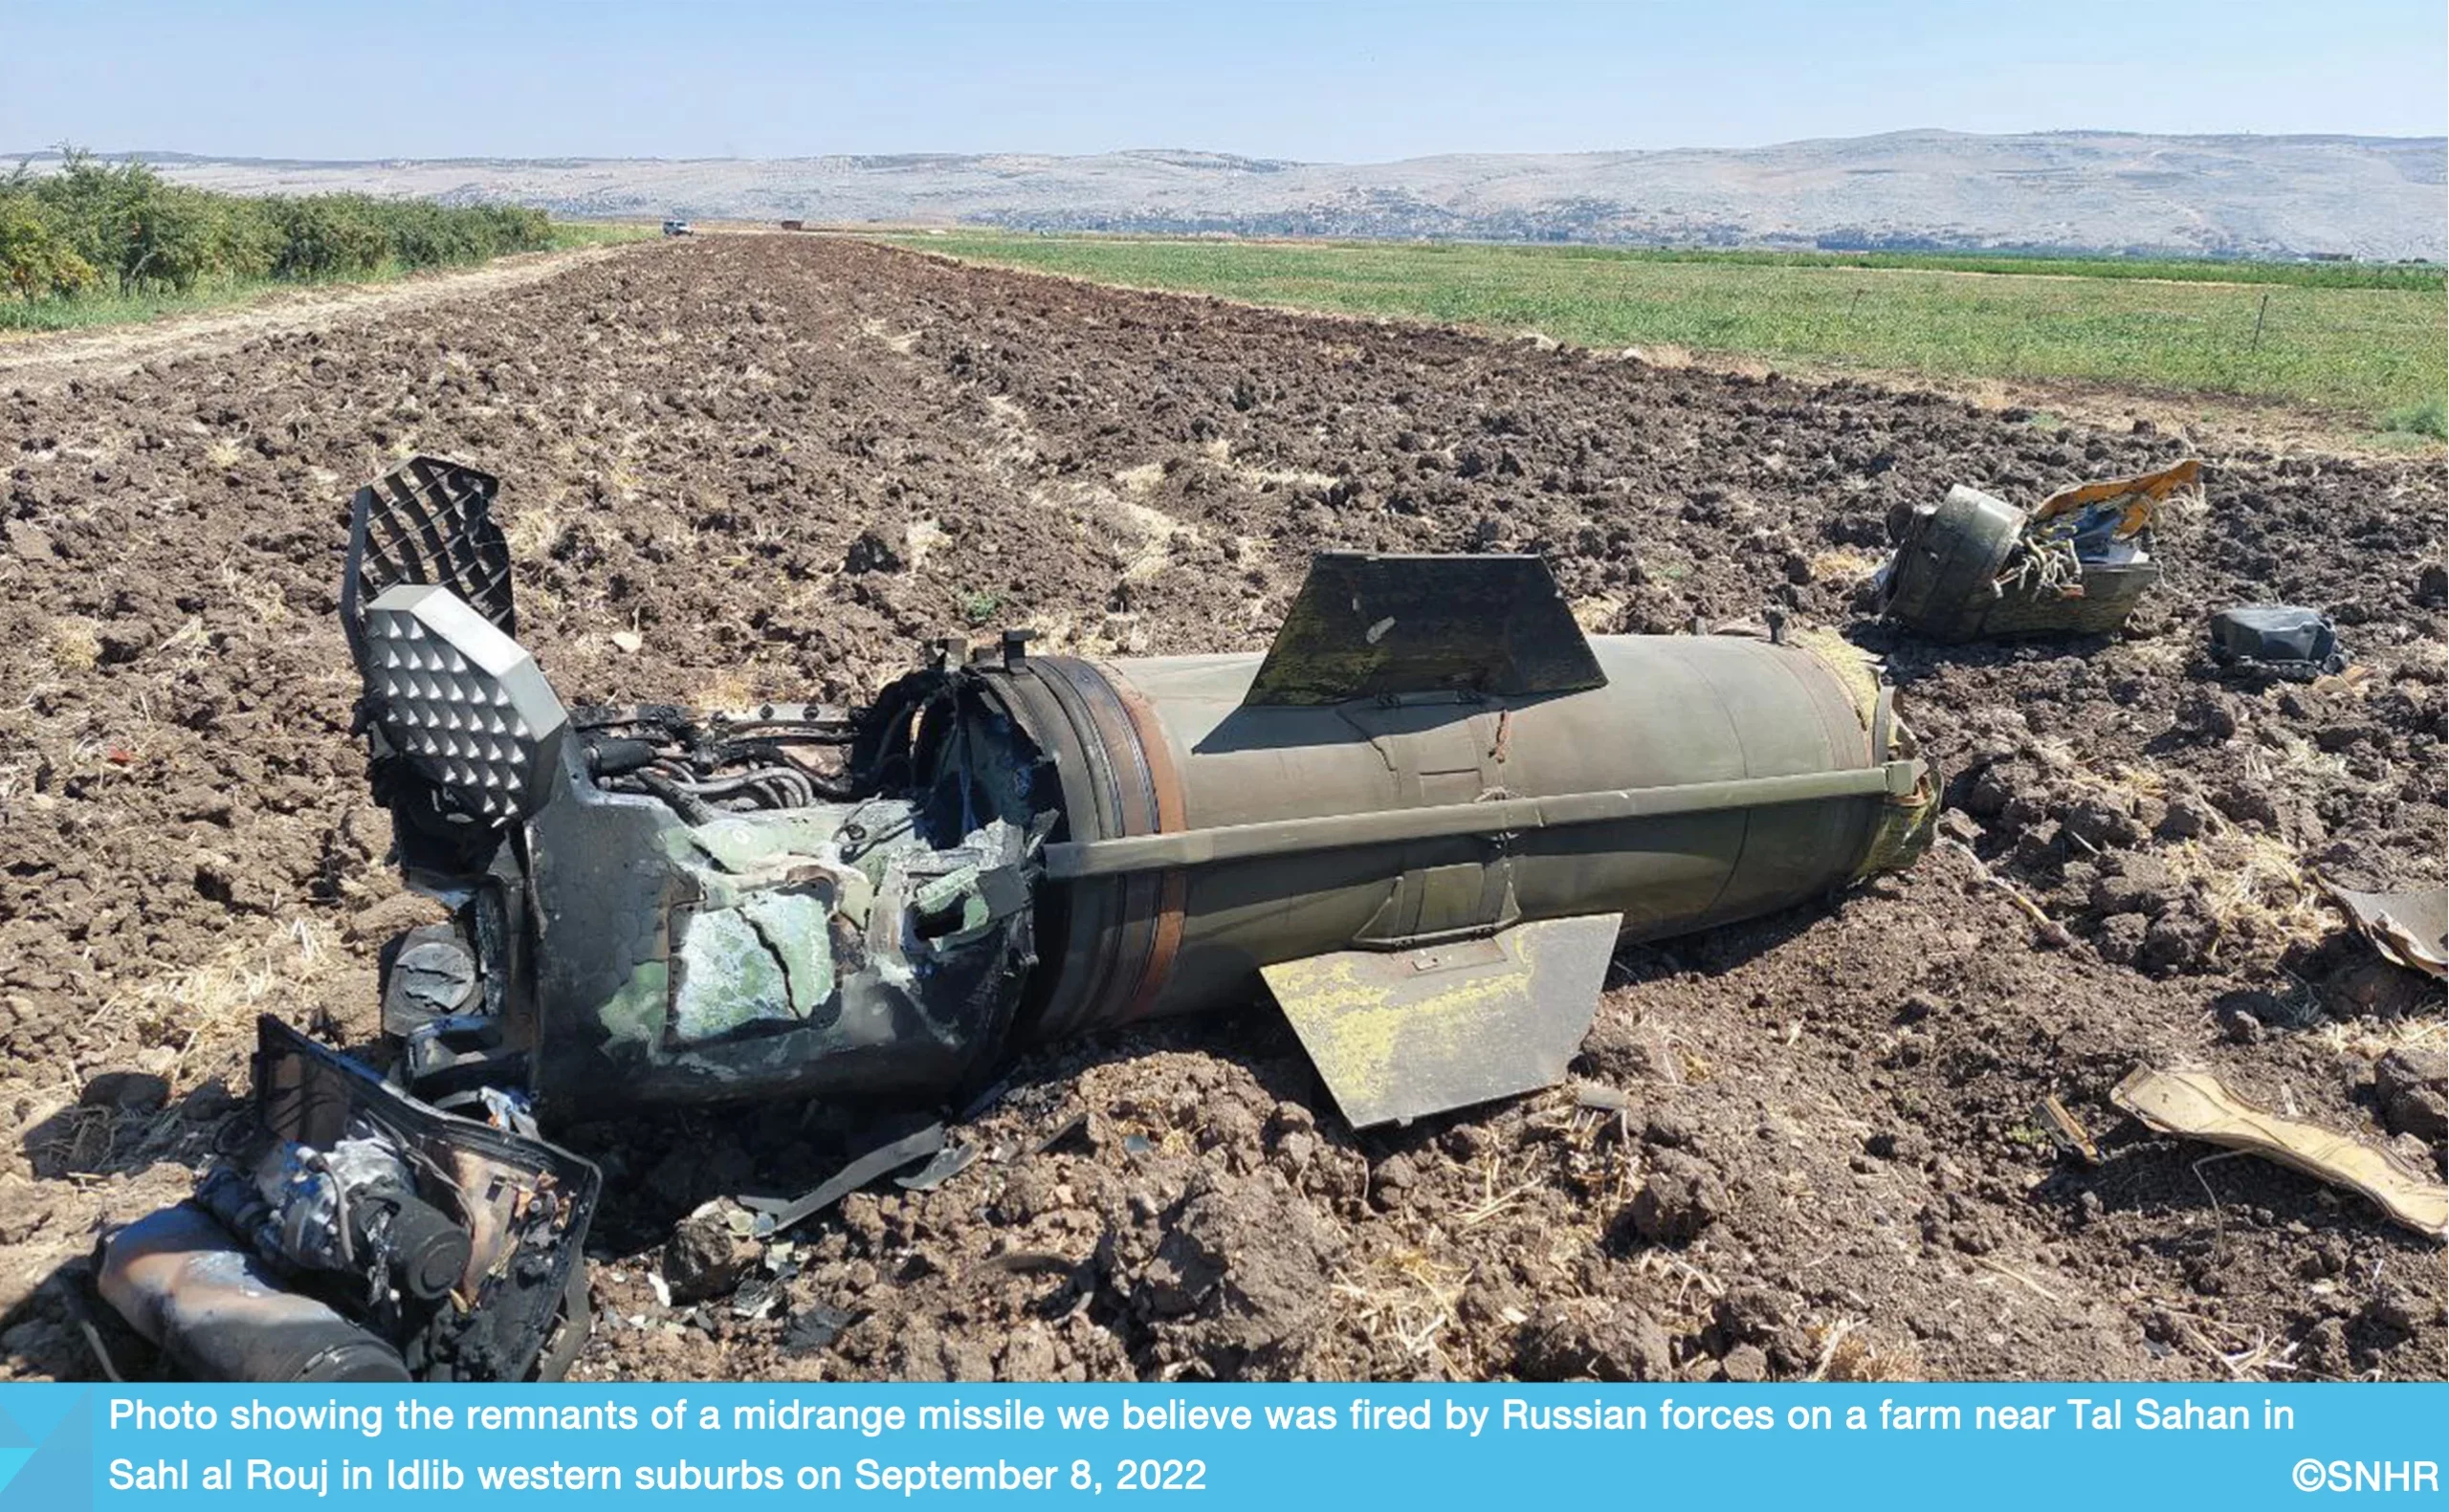 Remnants of a missile fired by Russian forces in western Idlib on September 8